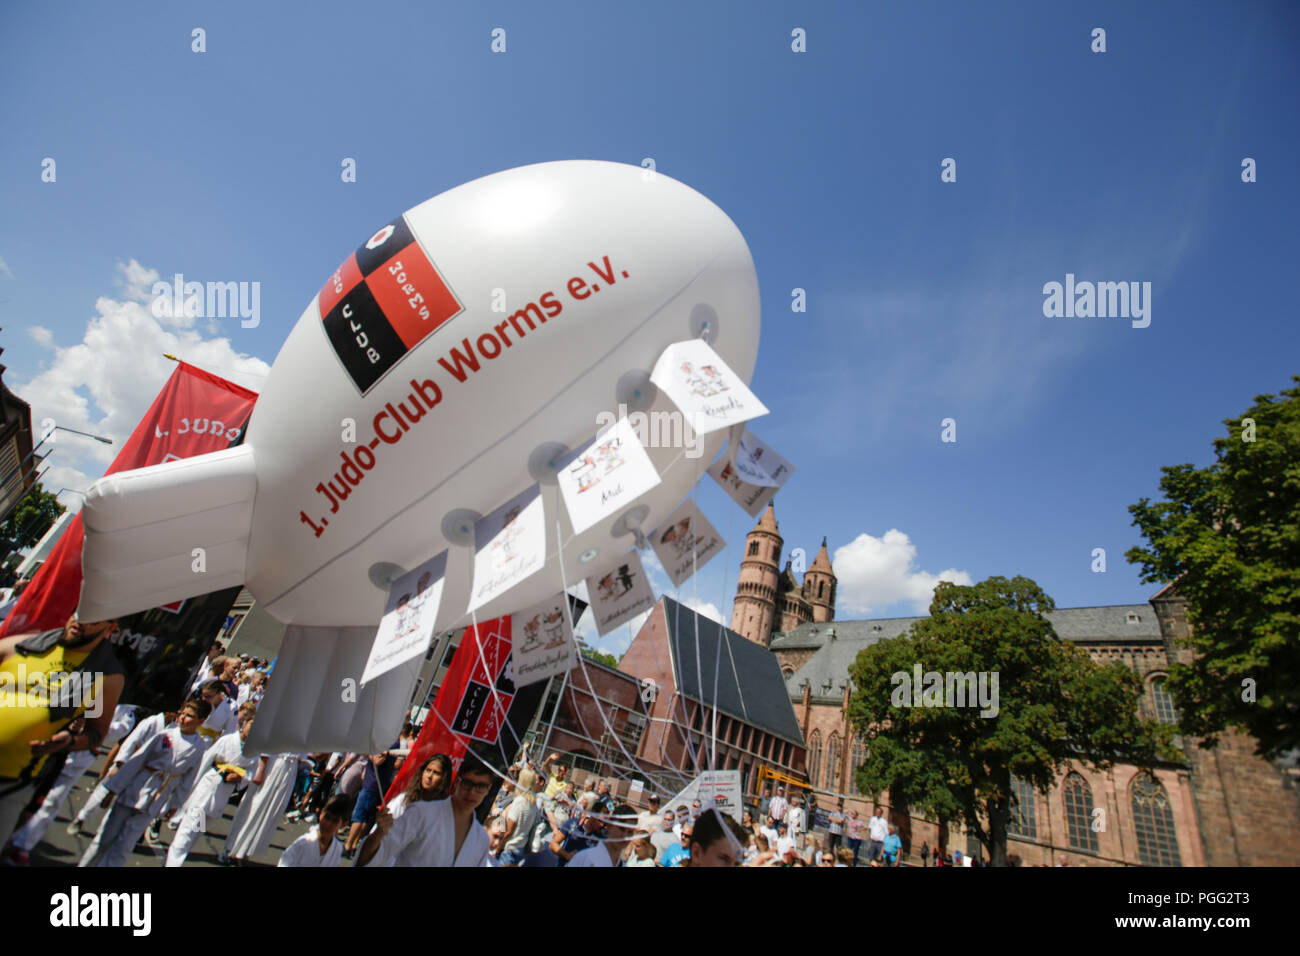 Worms, Germany. 26th August 2018. Members of the Judo-Club Worms carries a small air-filled Zeppelin in the parade. The first highlight of the 2018 Backfischfest was the big parade through the city of Worms with over 70 groups and floats. Community groups, music groups and businesses from Worms and further afield took part. Credit: Michael Debets/Alamy Live News Stock Photo